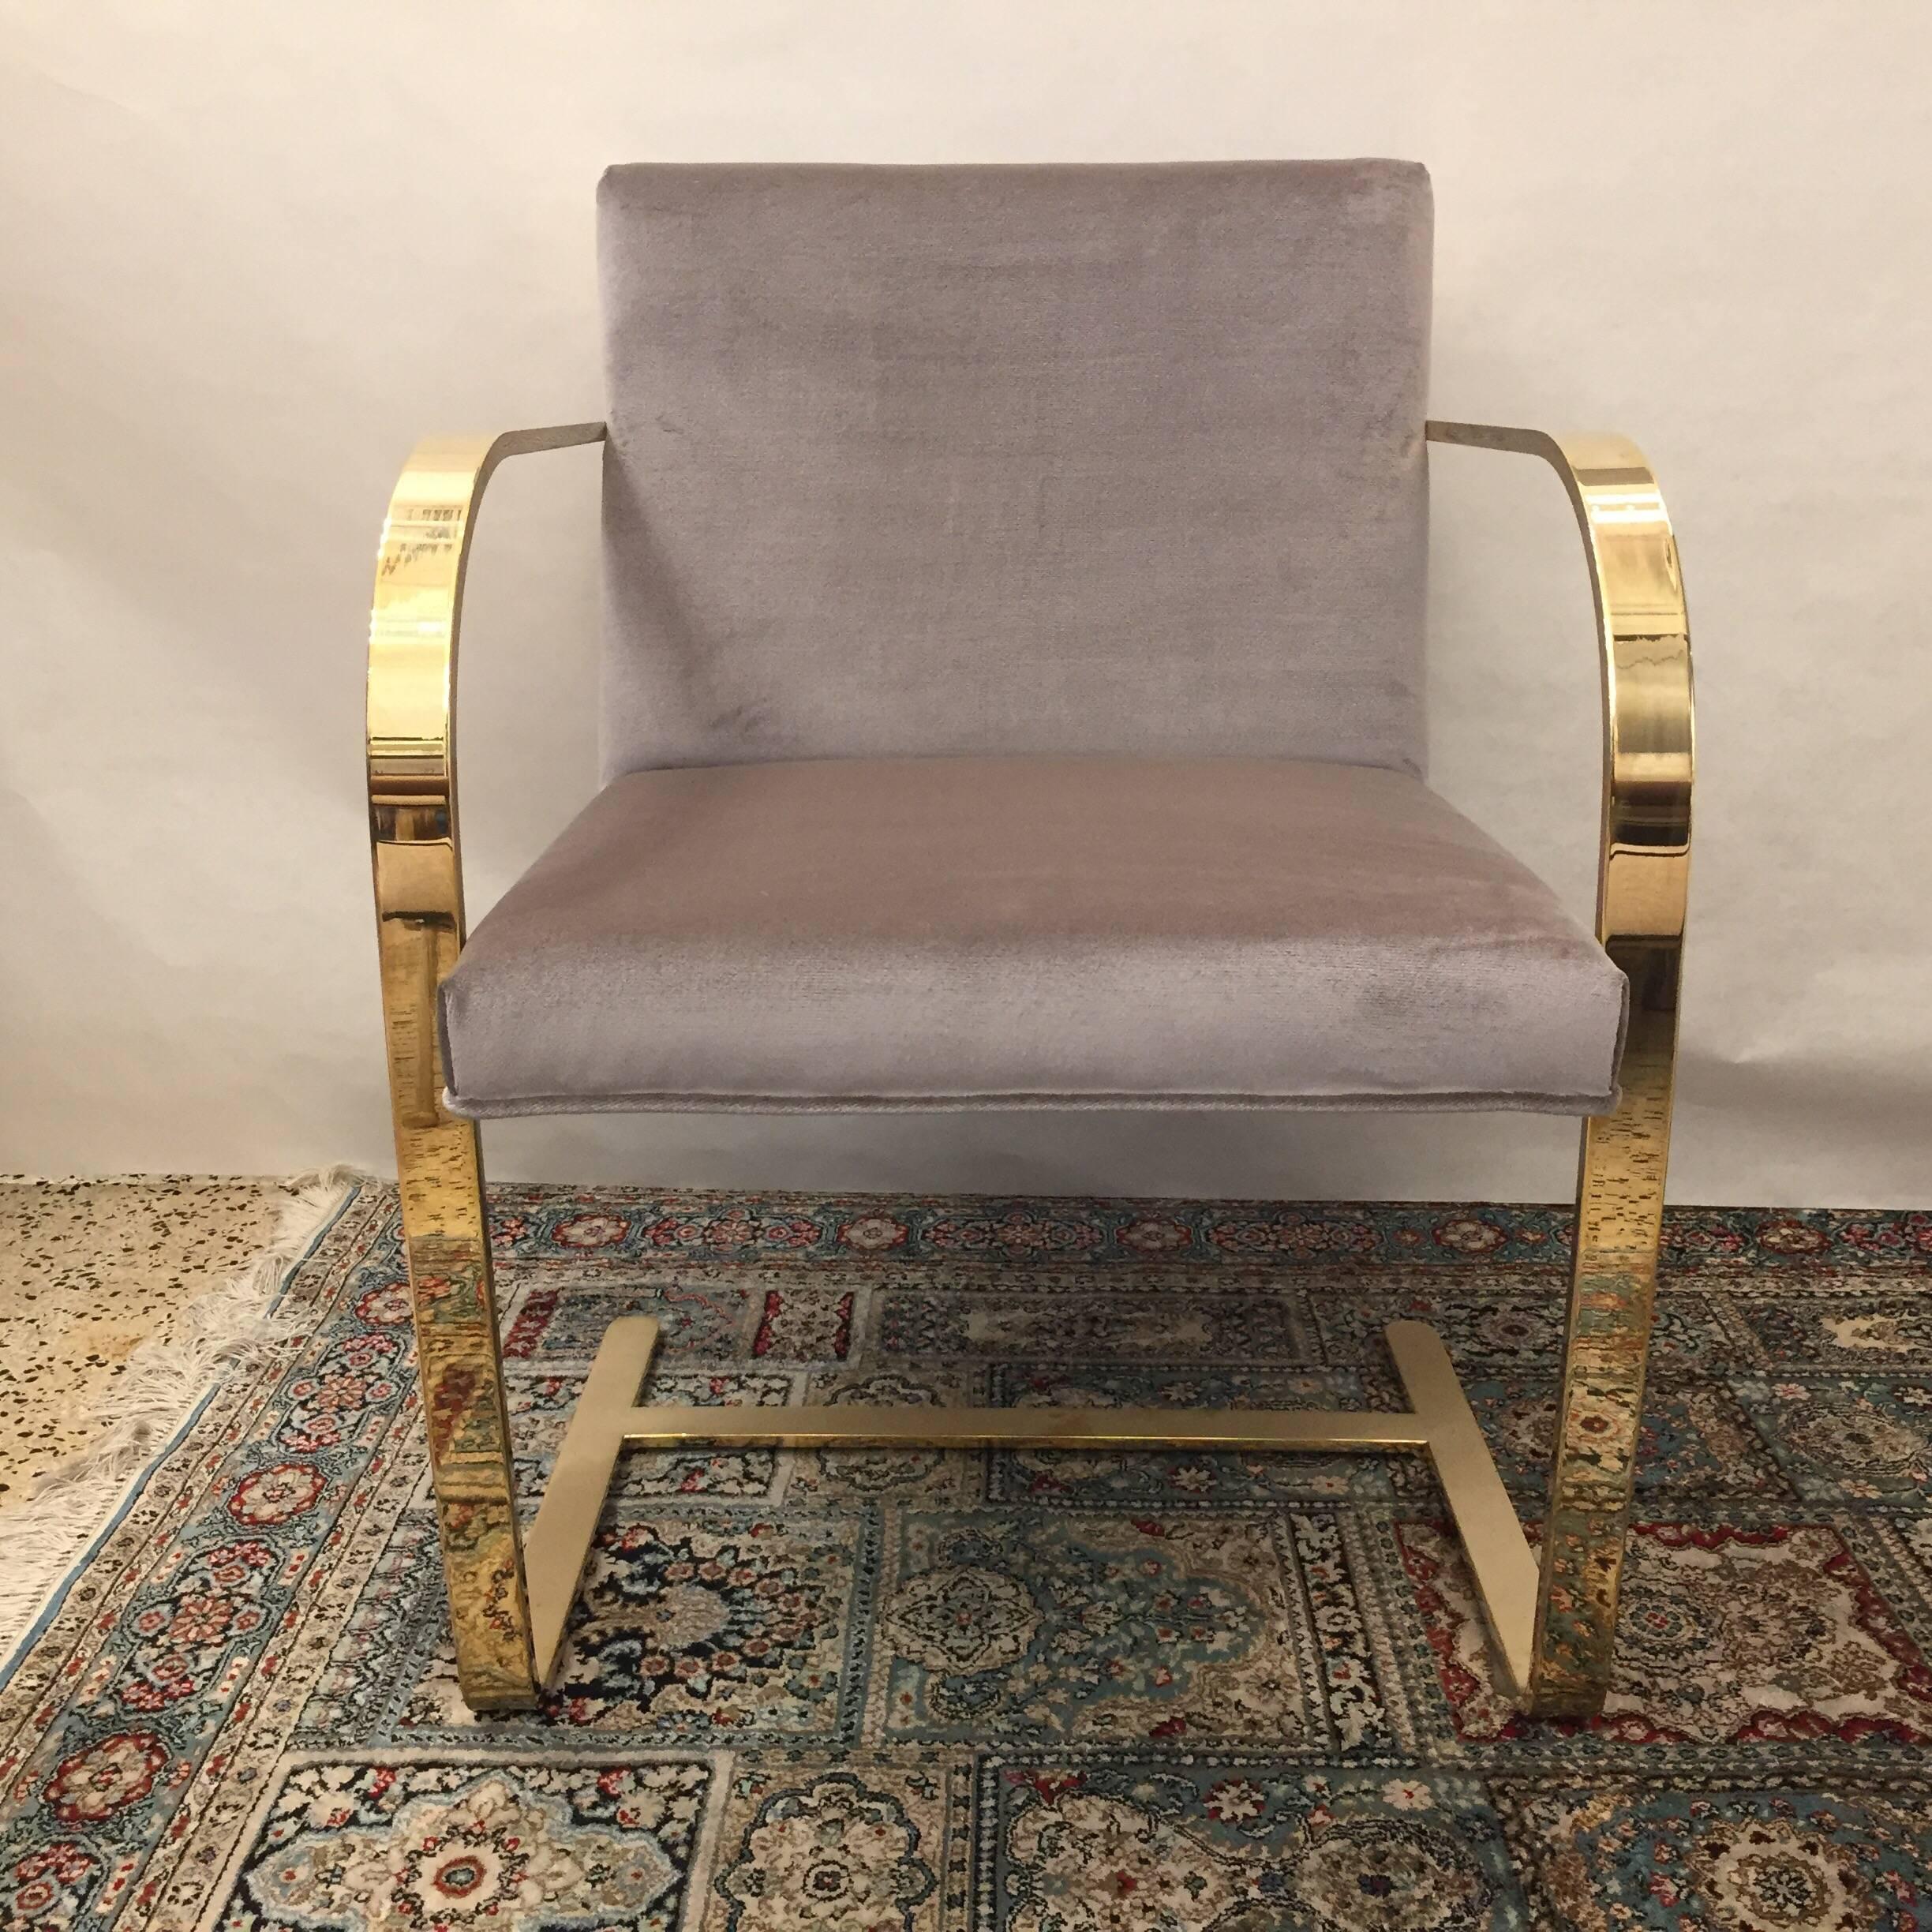 Beautifully polished solid brass flat bar chair for Knoll designed by Mies Van der Rohe. Italian grey mohair velvet upholstery.